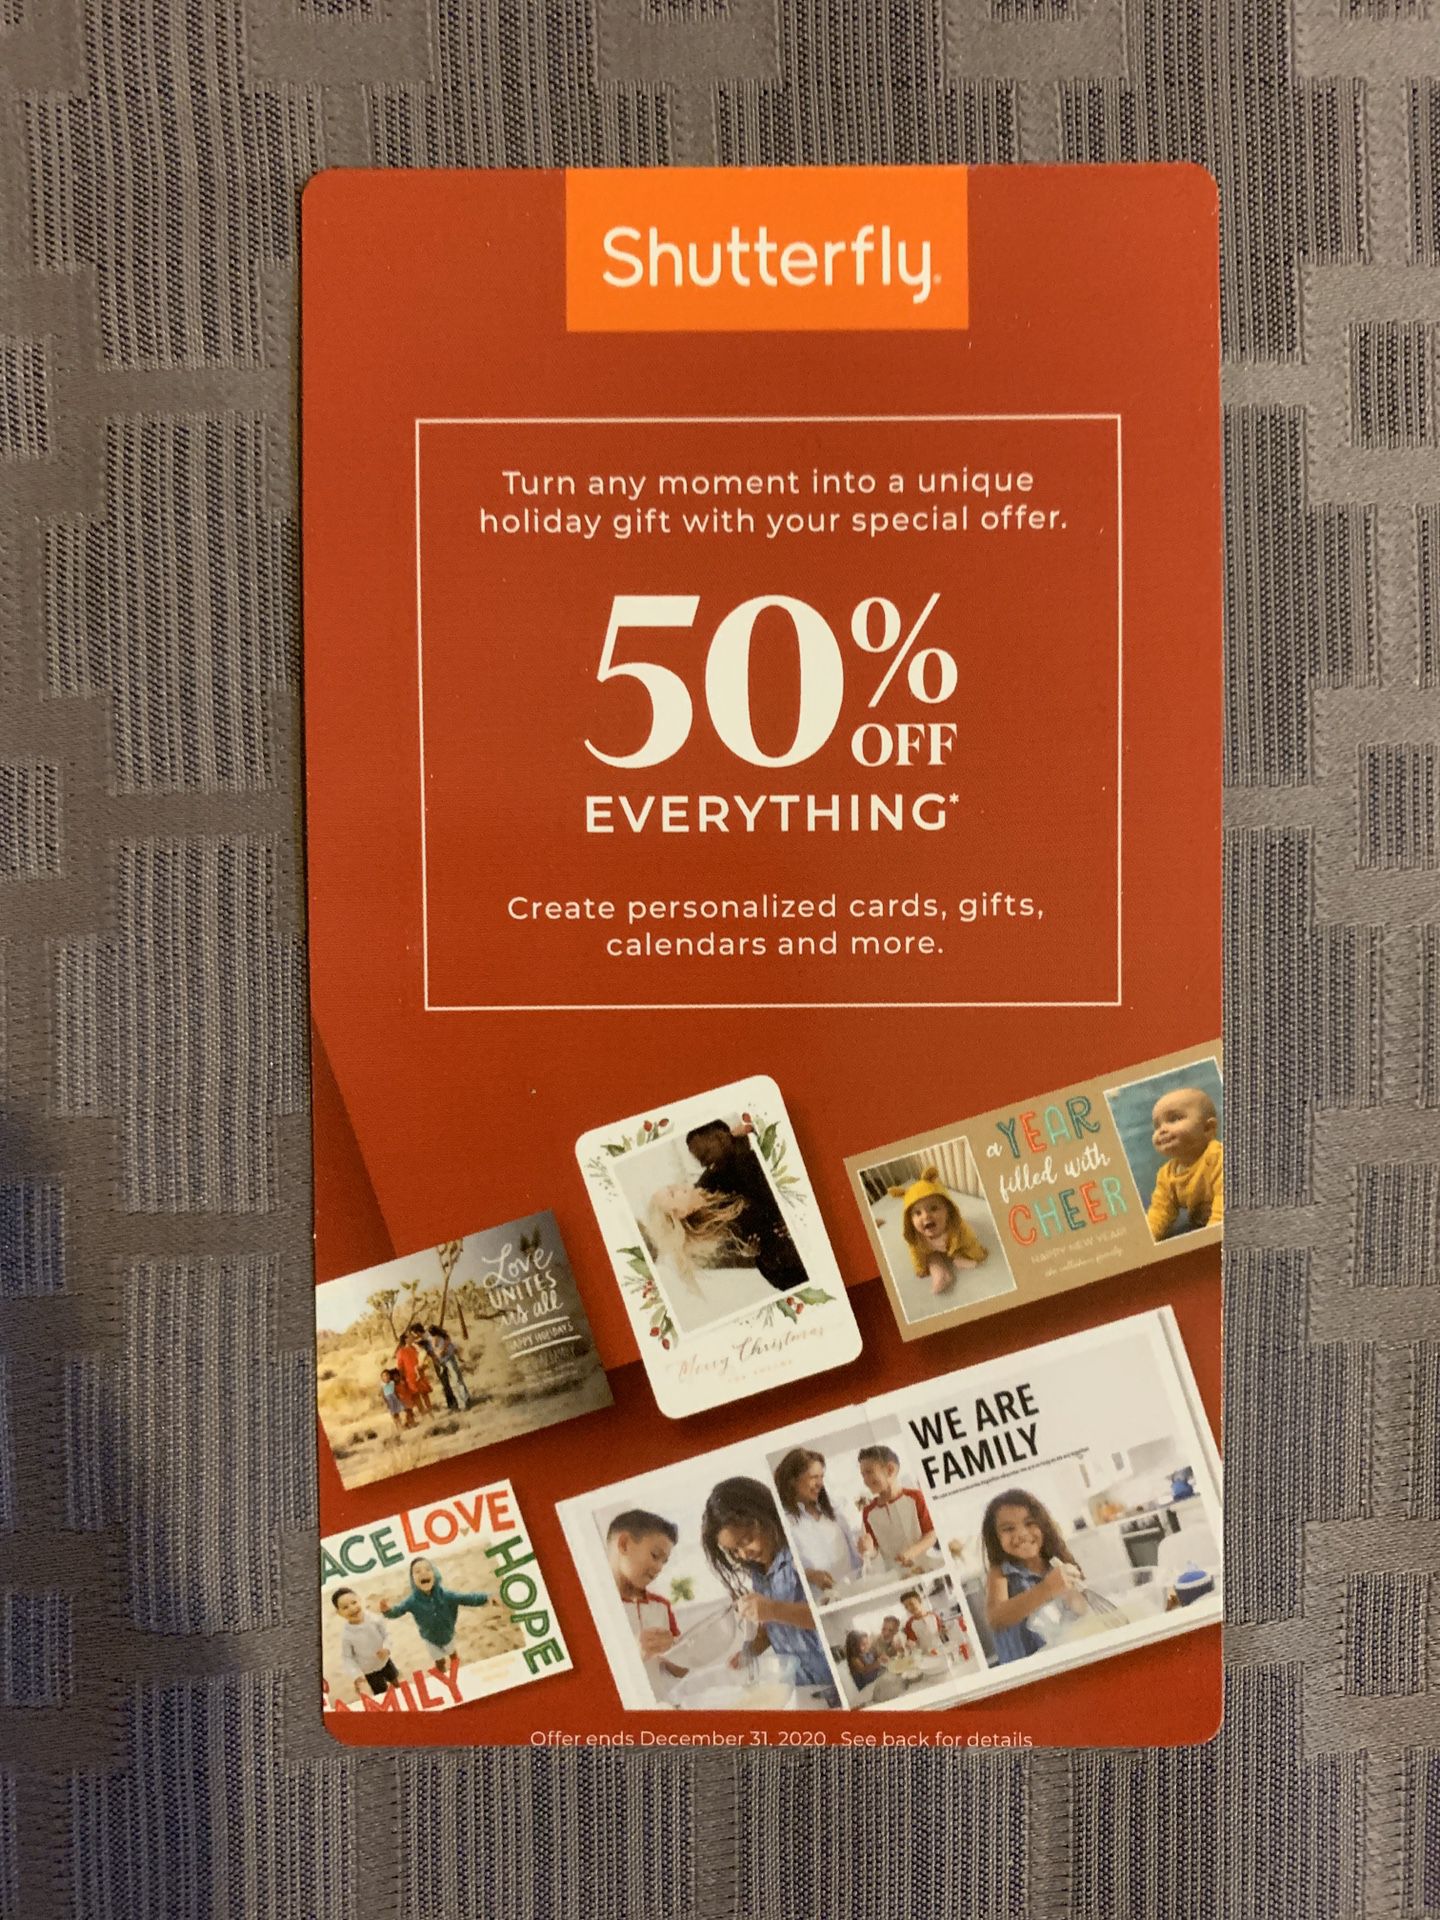 Shutterfly coupon code, 50% off everything, expires 12/31/2020